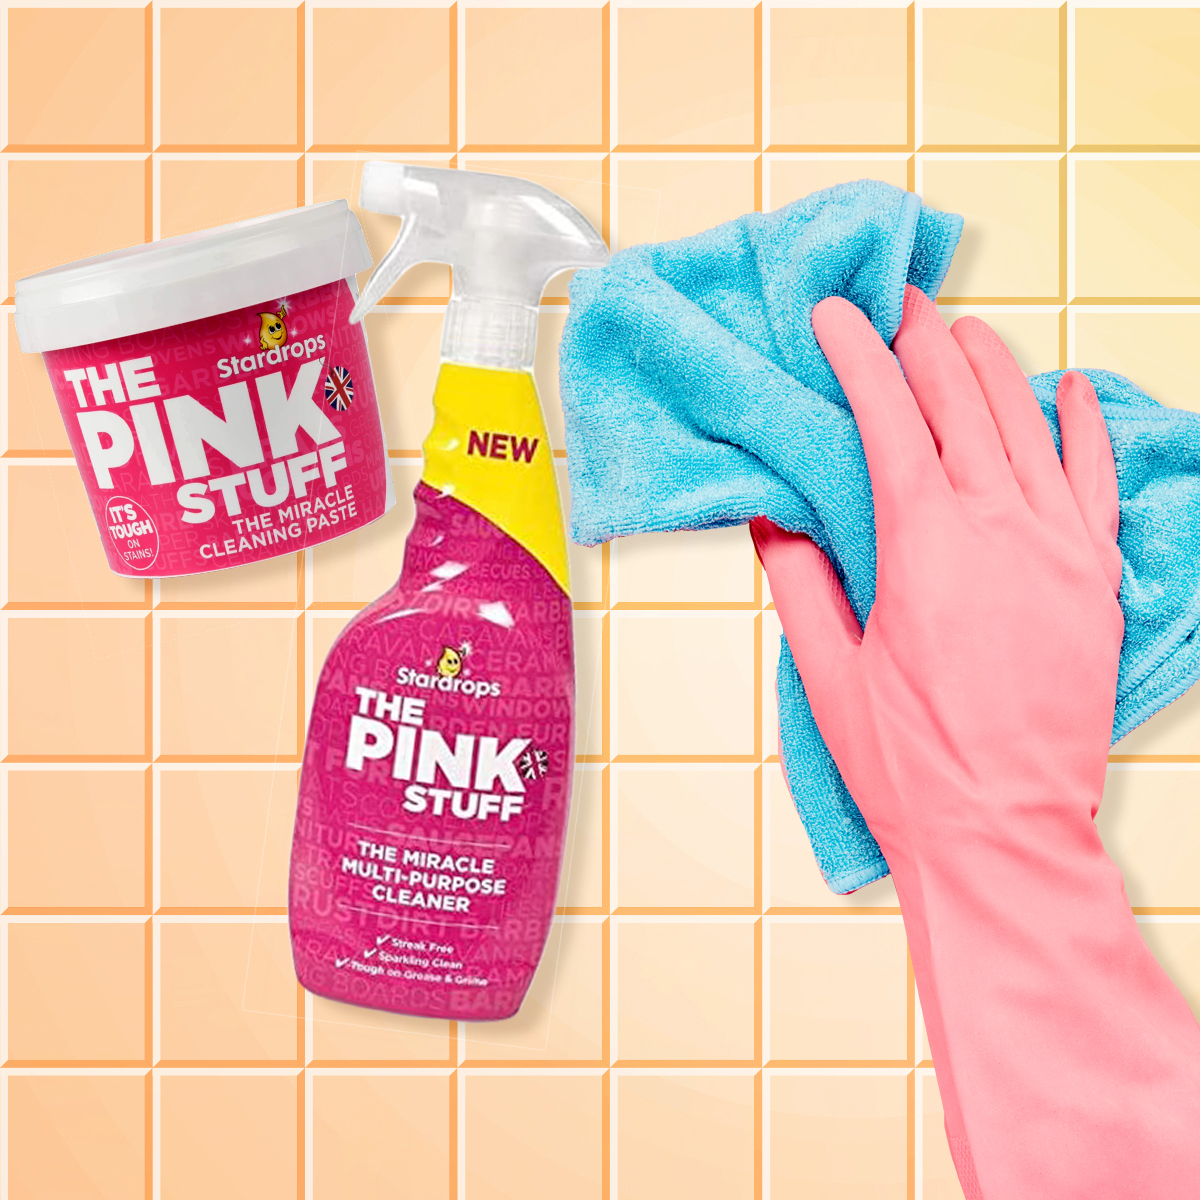 5 Nerdy-But-Brilliant Cleaning Tips from the People at The Pink